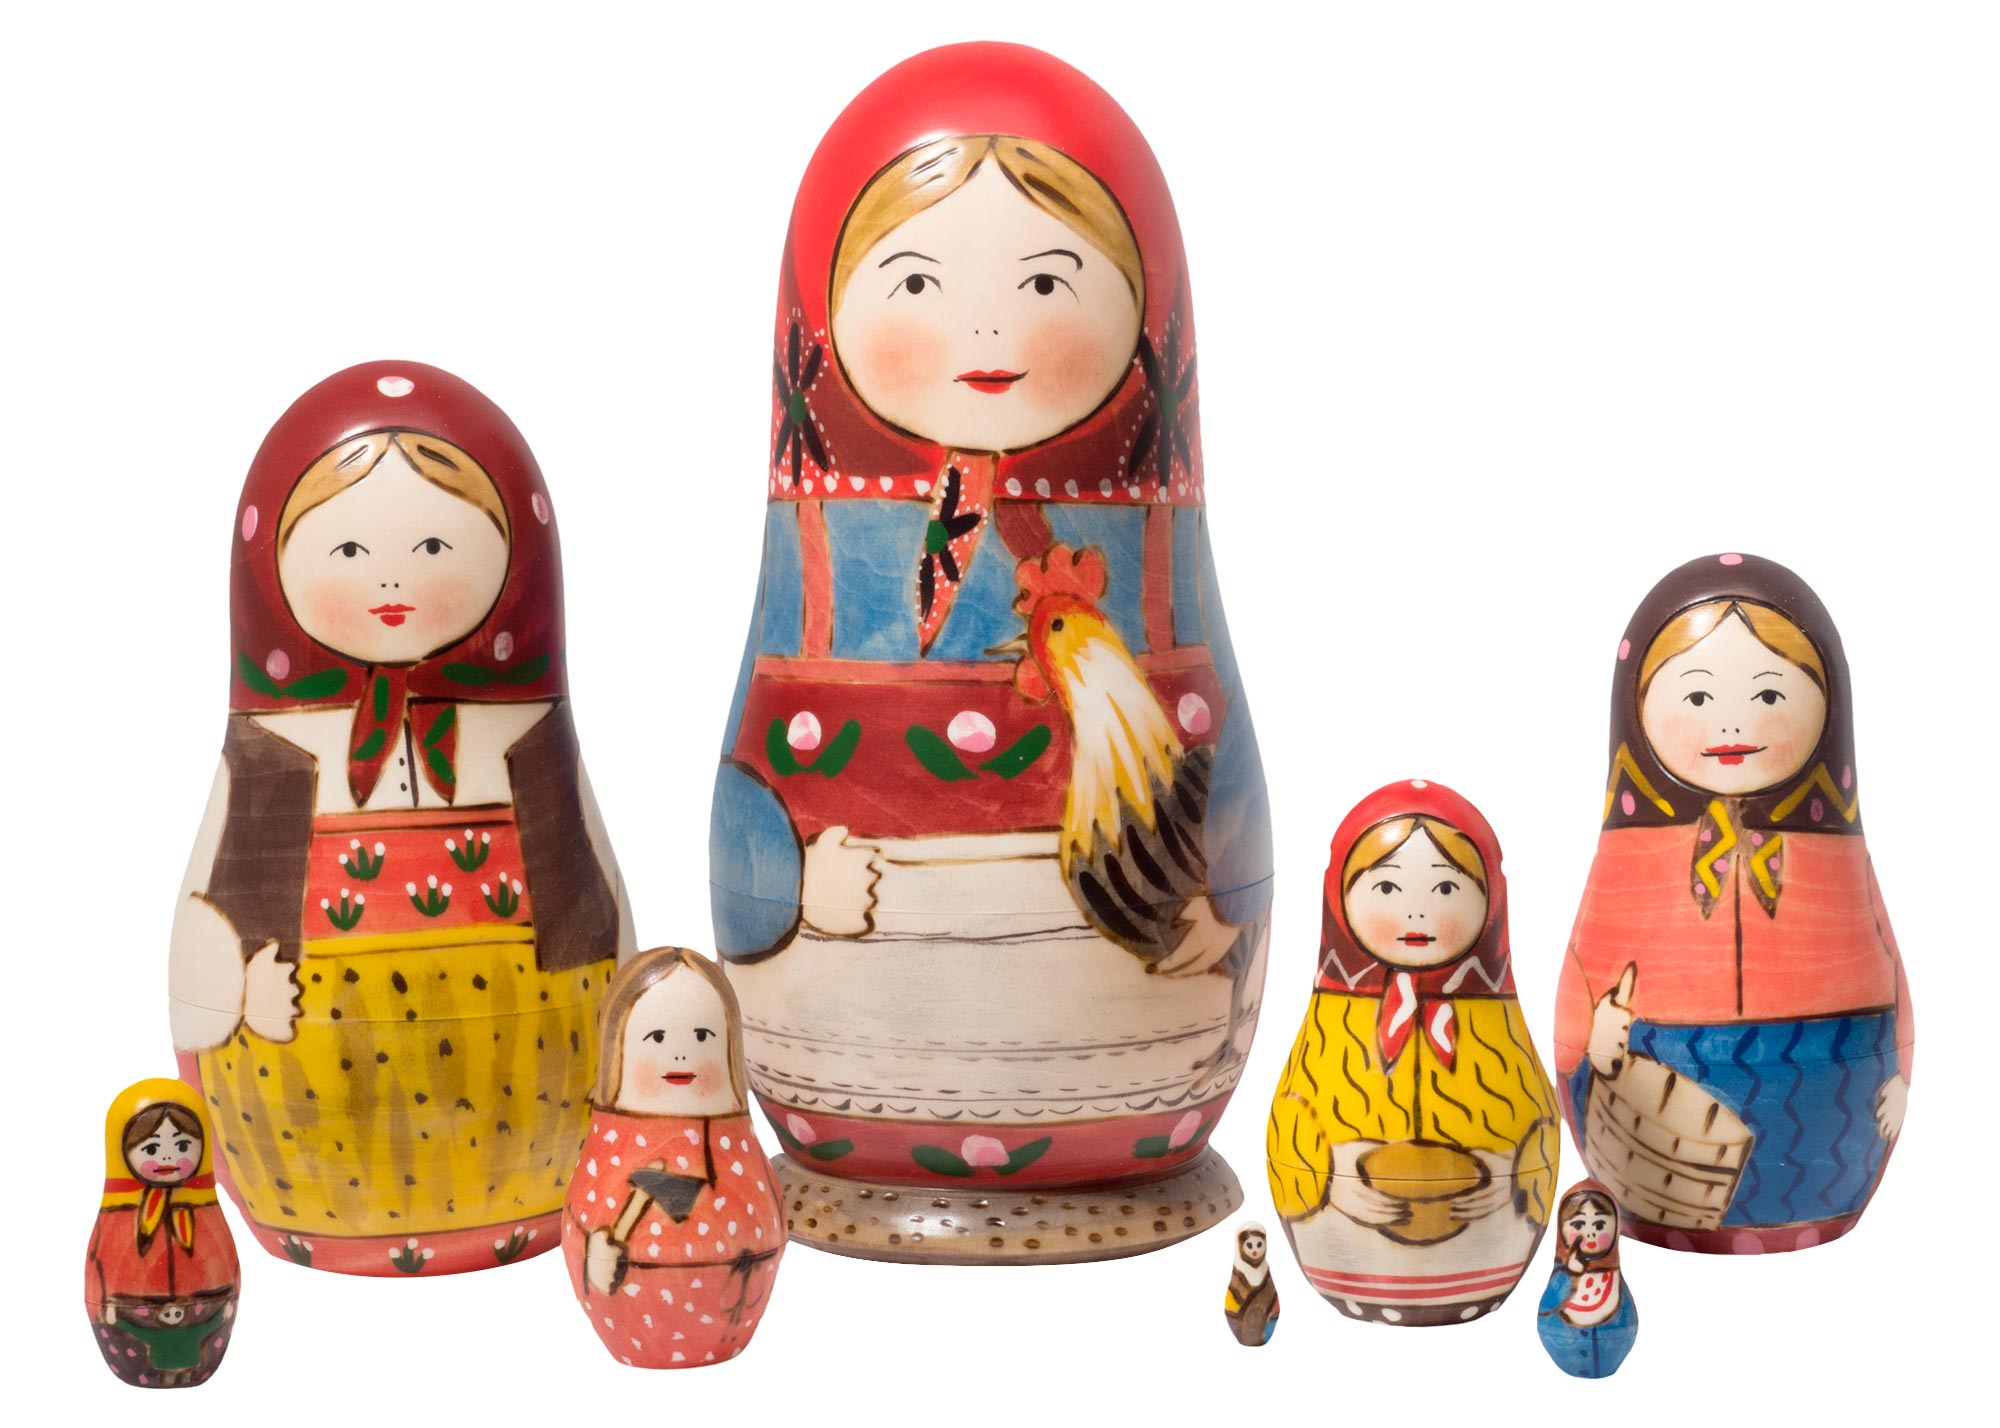 Buy Peasant Matriarch Doll 8pc./7" - The First Nesting Doll at GoldenCockerel.com